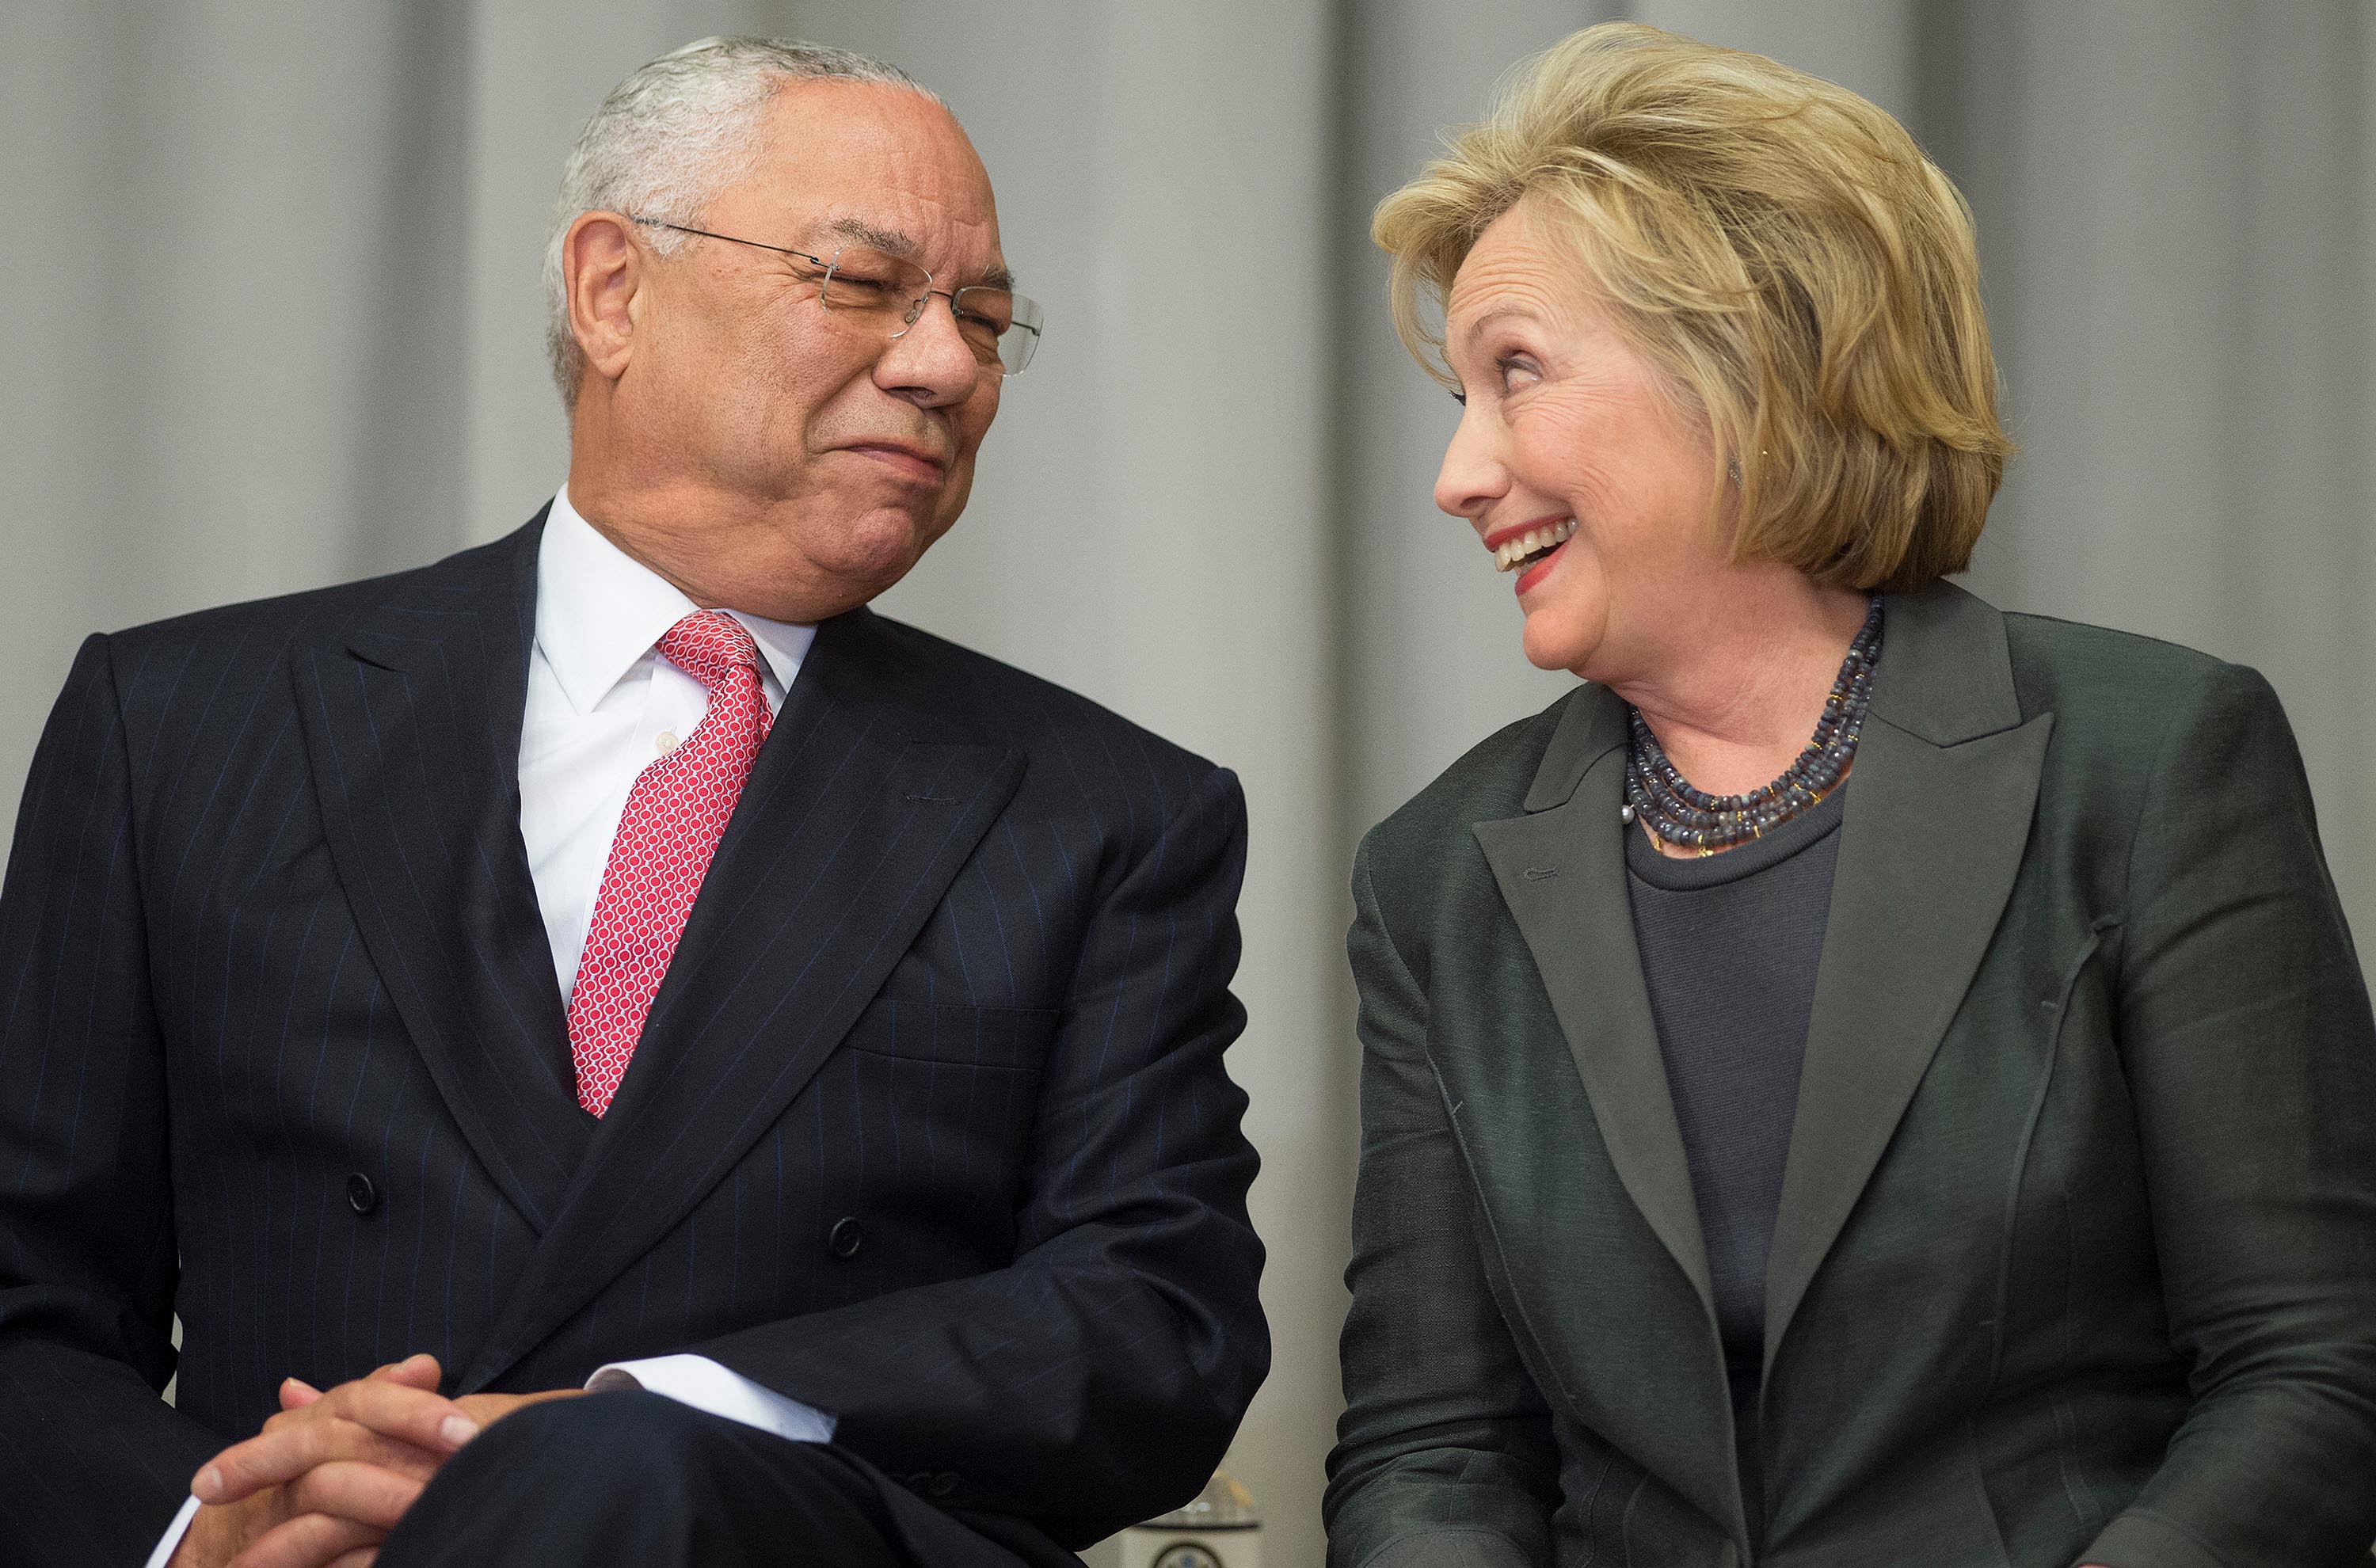 Former US Secretaries of State Colin Powell and Hillary Clinton speak during a ceremony to break ground on the US Diplomacy Center at the US State Department in Washington, DC, September 3, 2014.